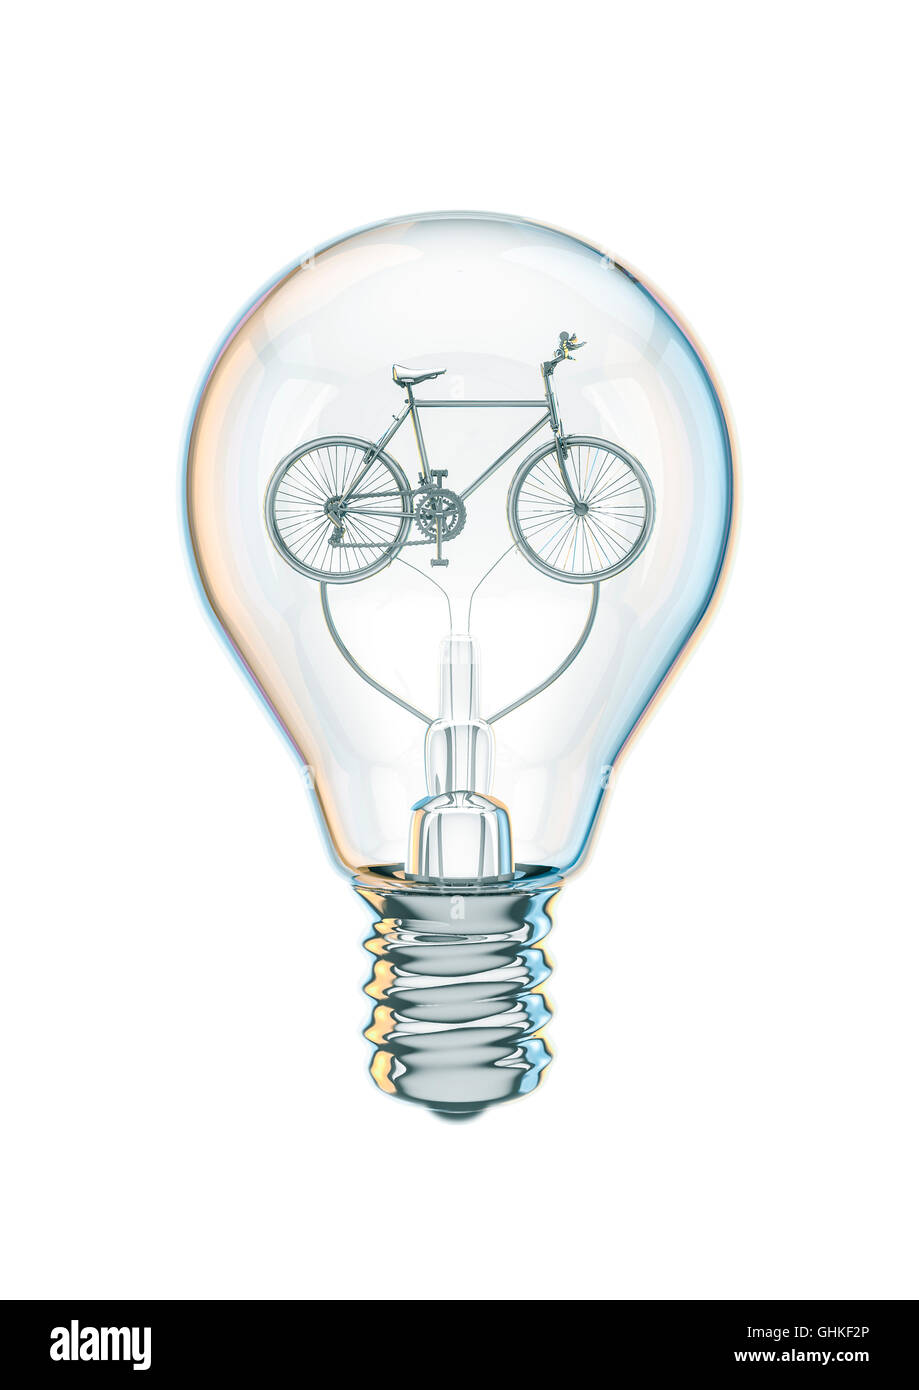 Bicycle bulb concept / 3D illustration of bicycle as filament inside light  bulb Stock Photo - Alamy